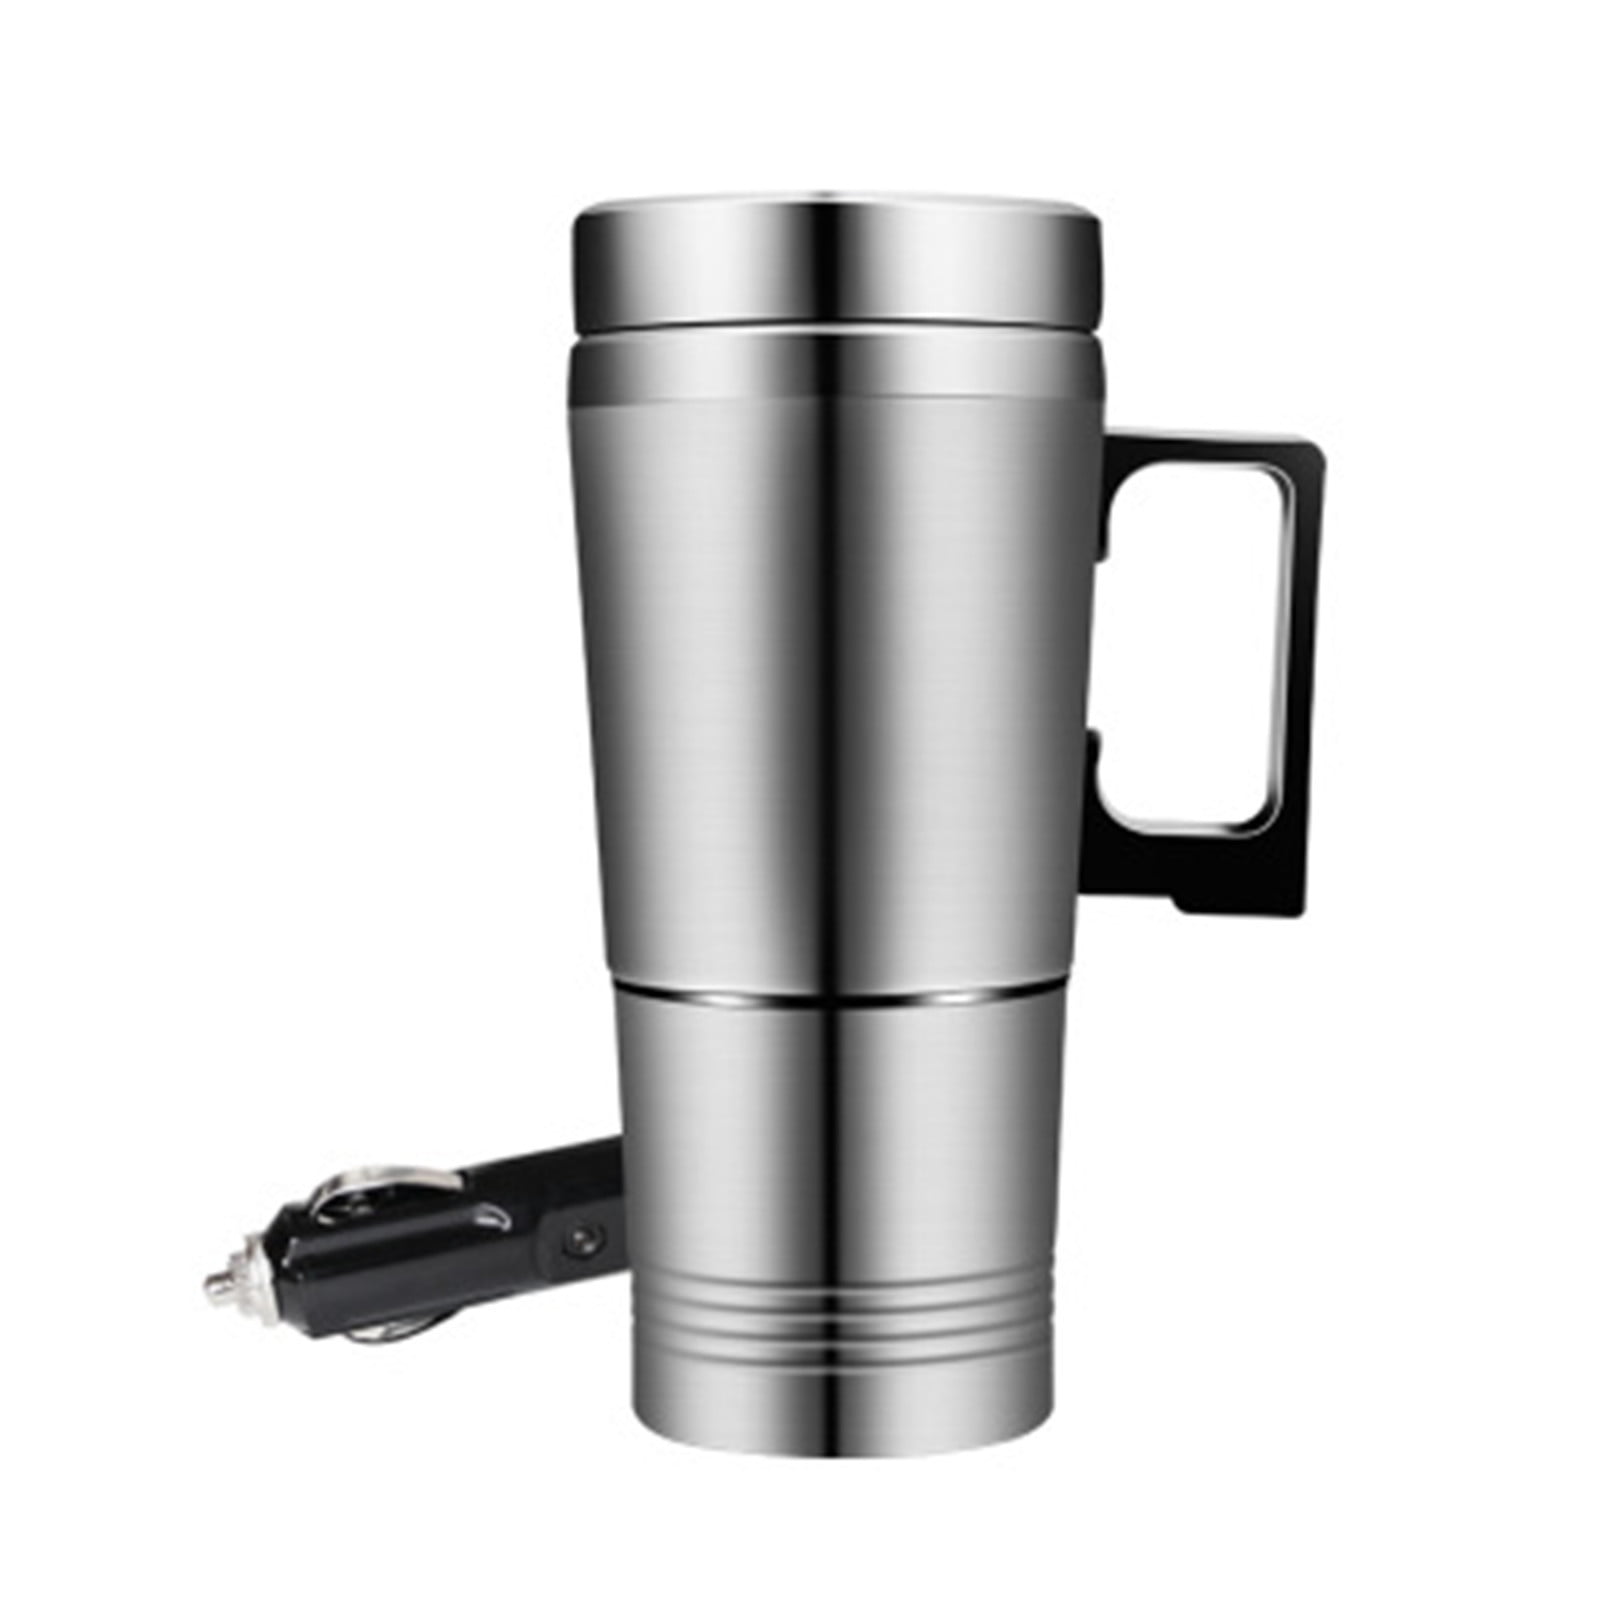 New 12v Stainless Steel Electric Mug Cup Auto Car Heated Travel Flask Kettle Jug 